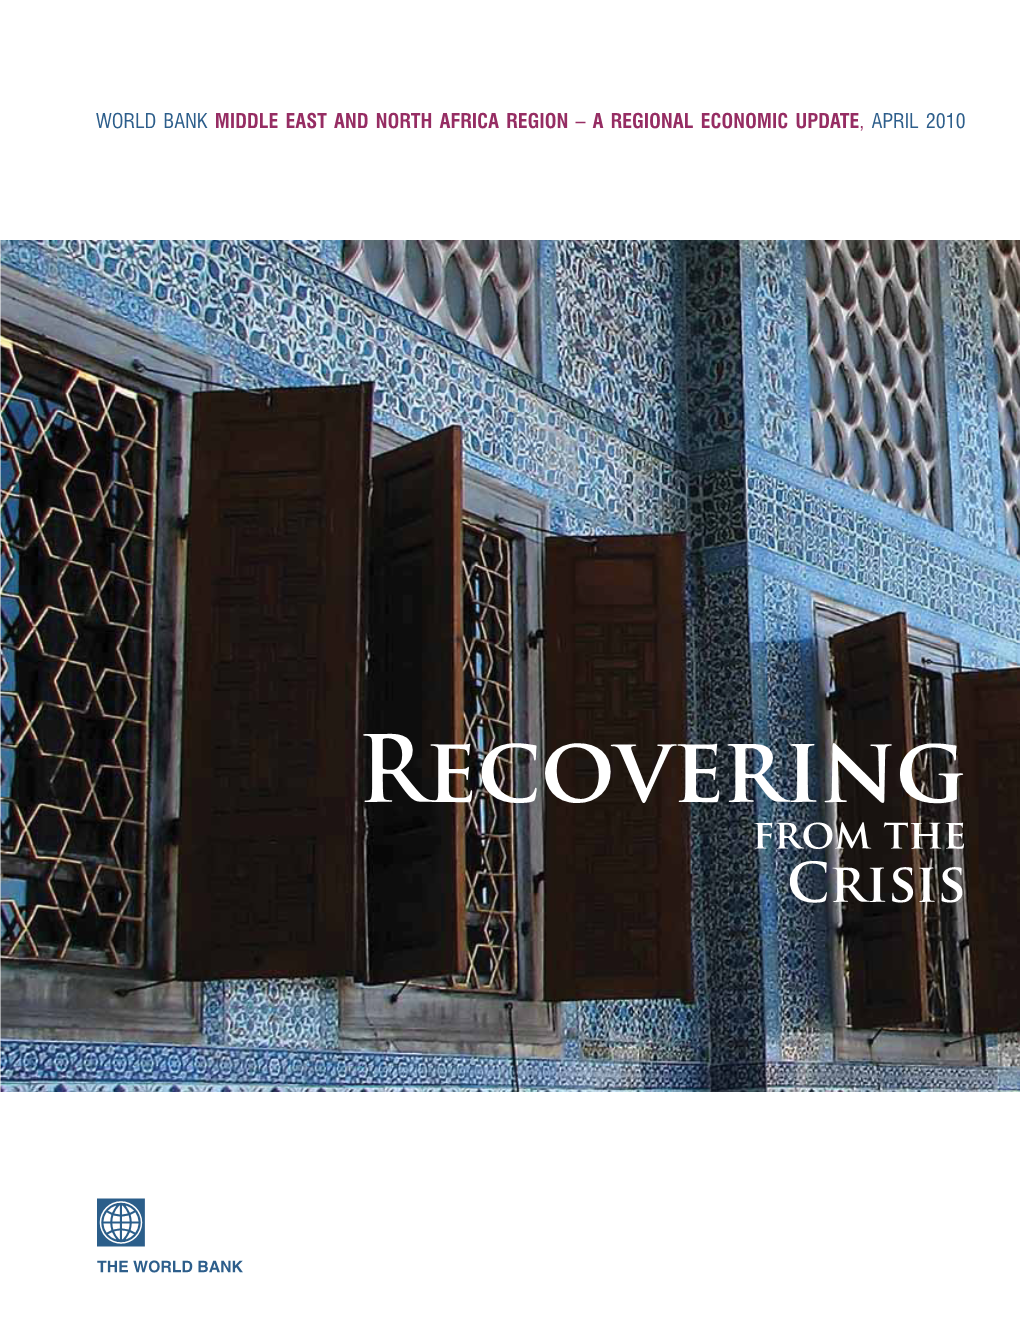 Recovering from the Crisis